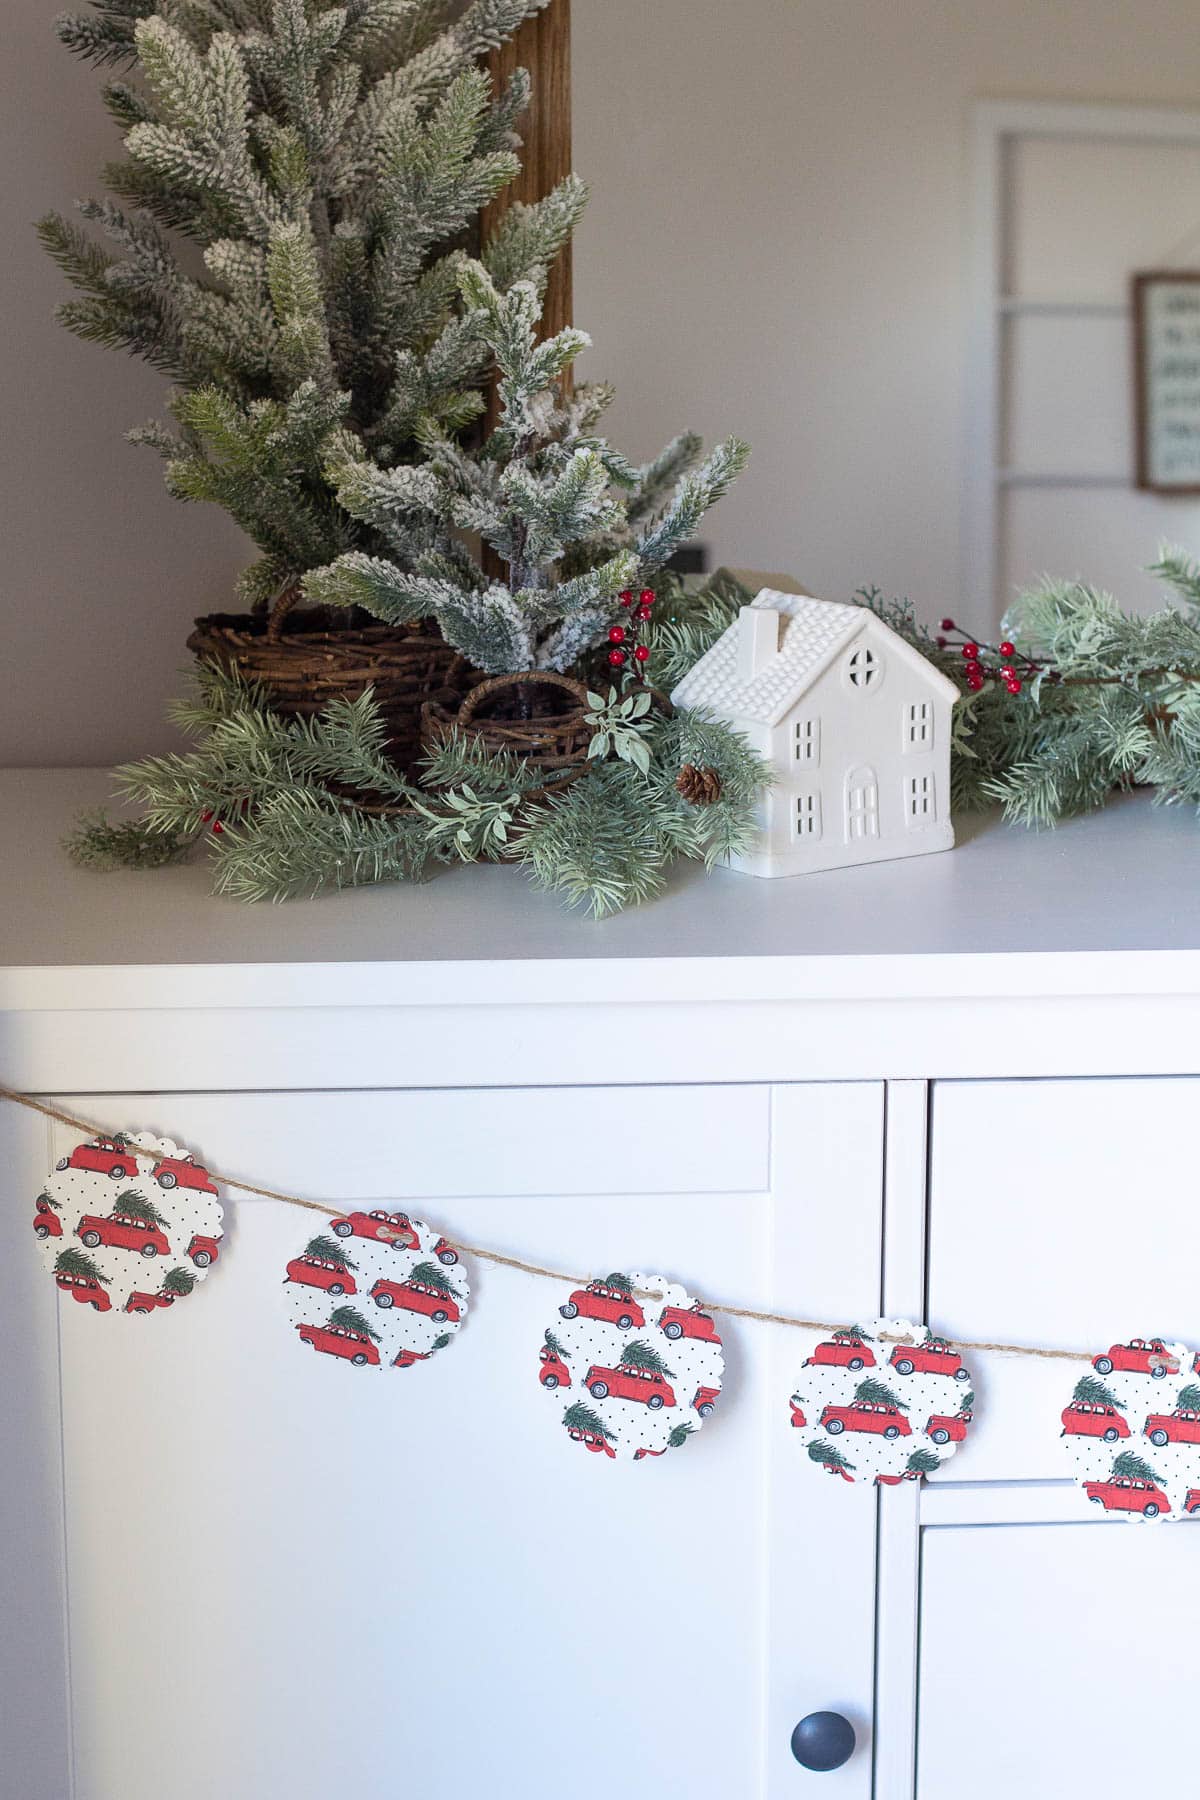 How to Make a DIY Christmas Garland with Scrapbook Paper